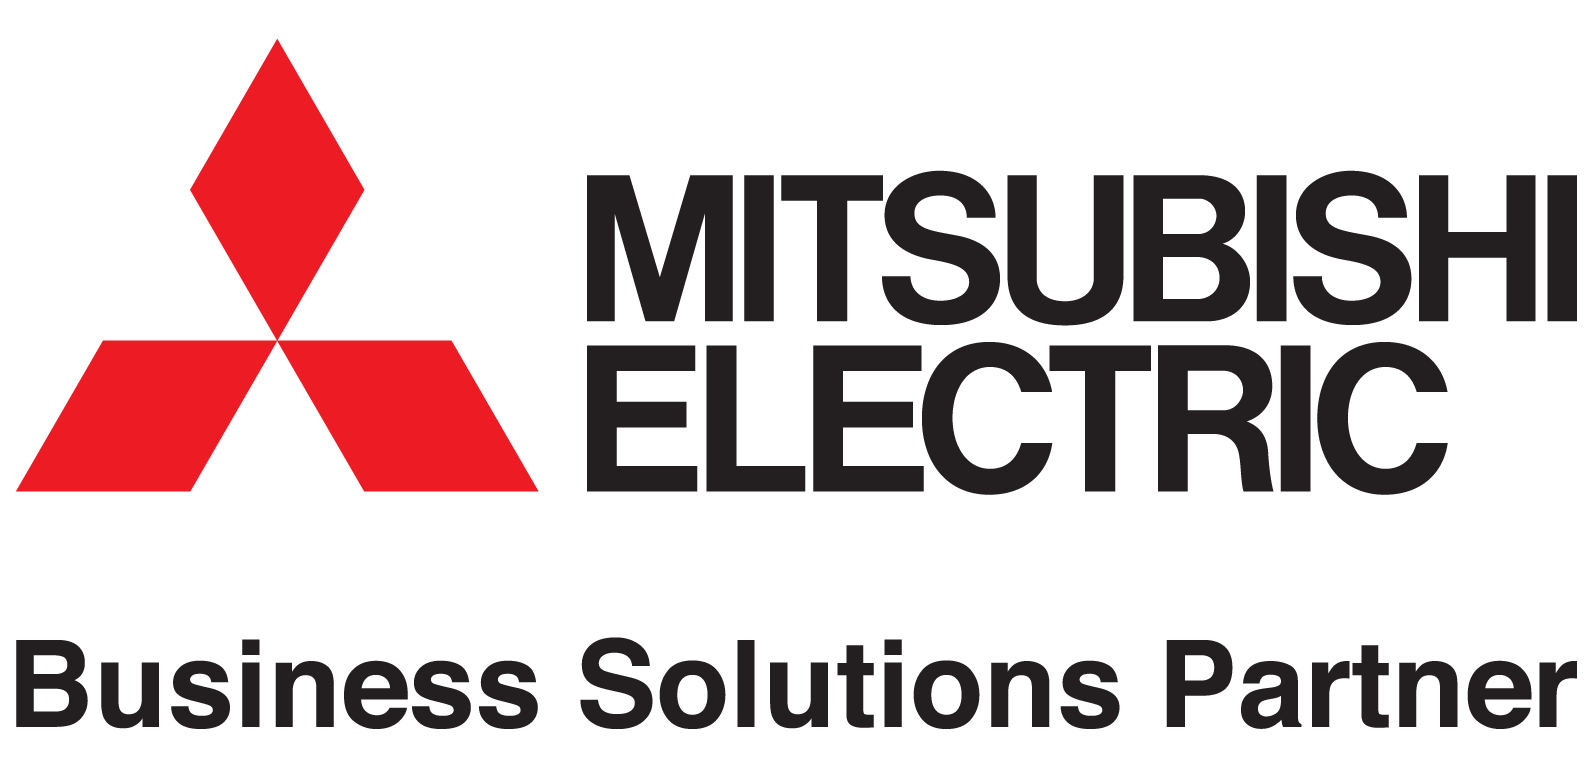 Mitsubishi Electric Business Solutions Partner